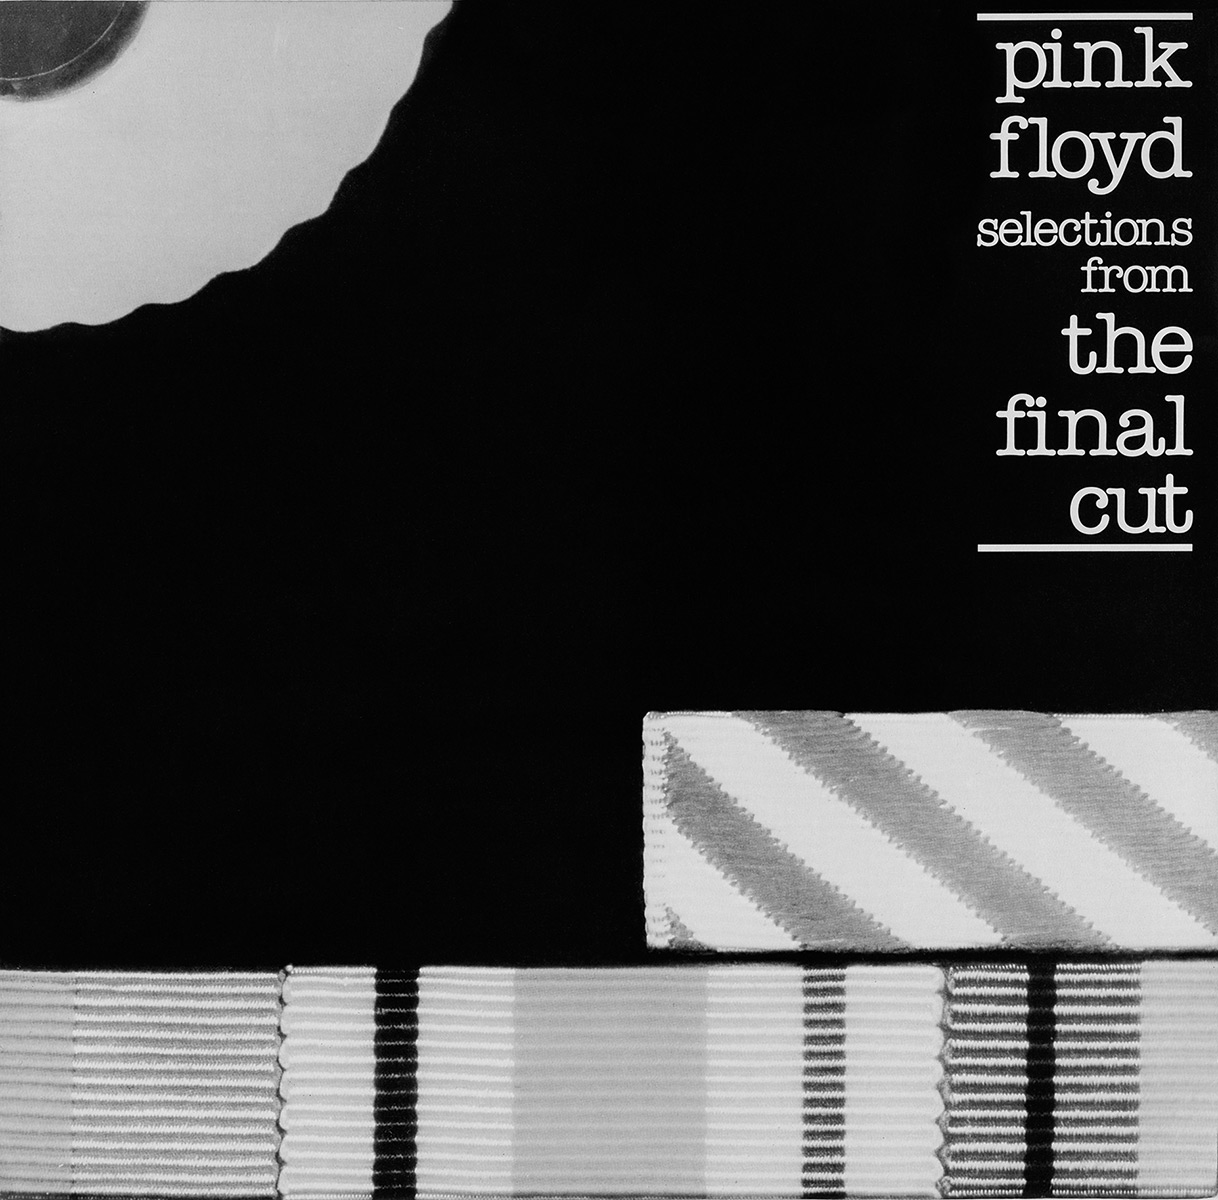 Pink Floyd Archives-U.S. Pink Floyd EP Discography